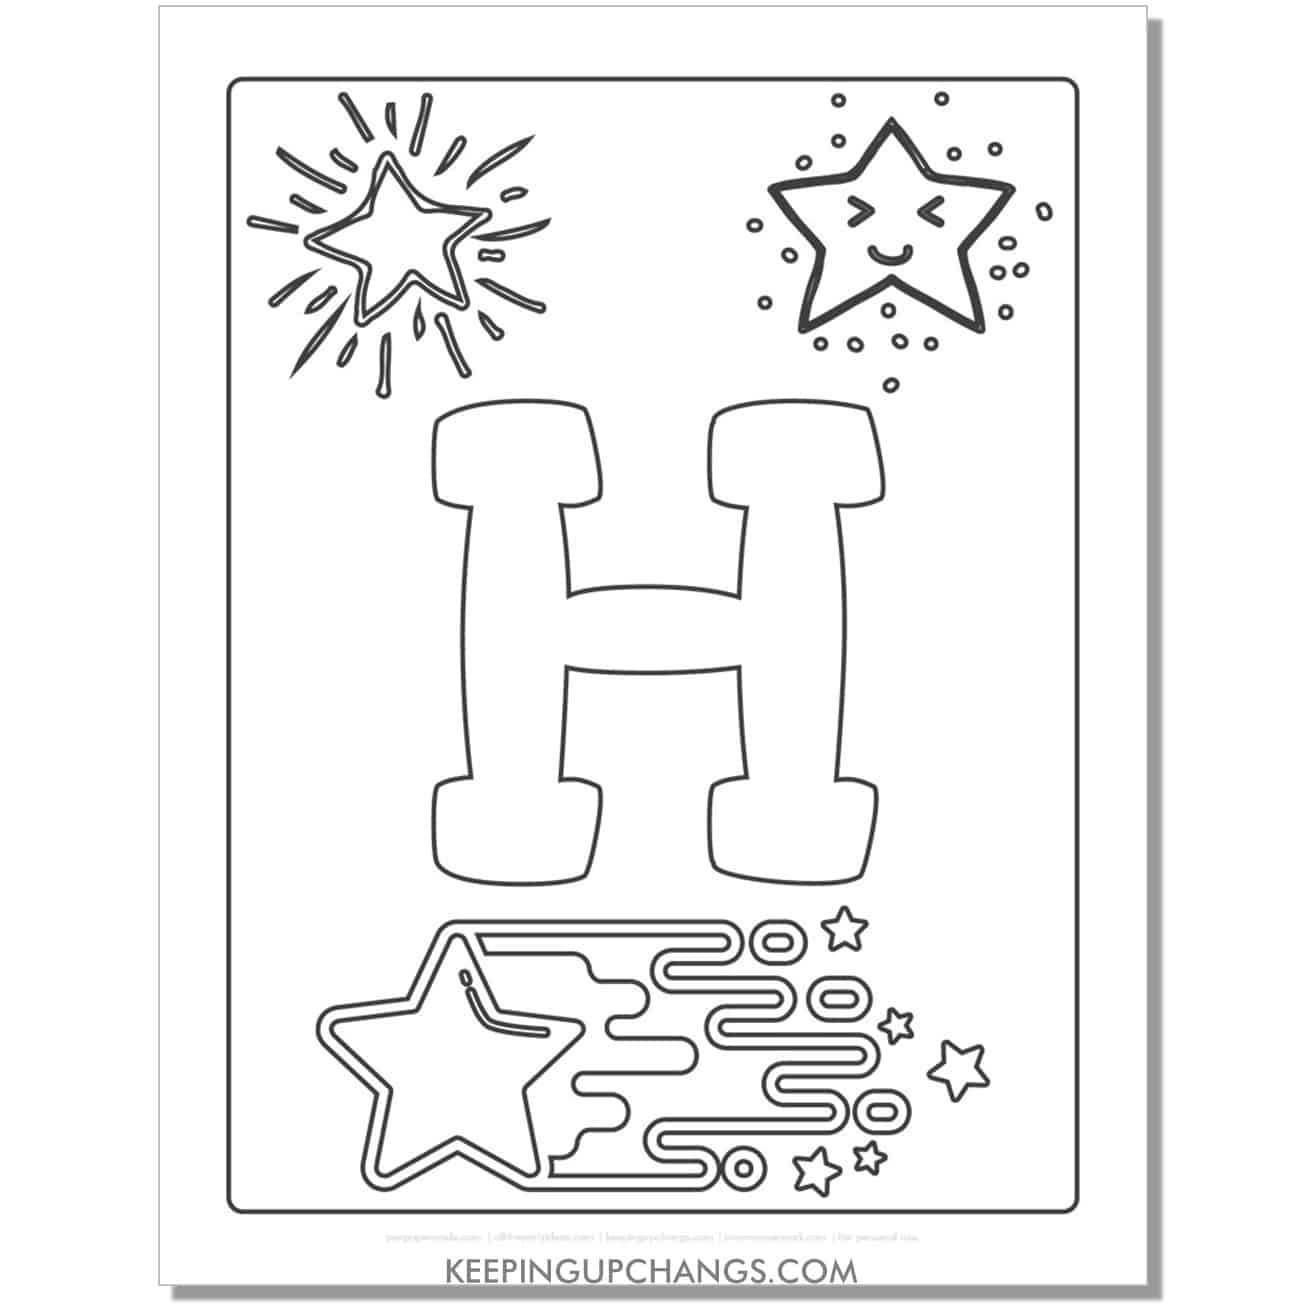 cool letter h to color with stars, space theme.